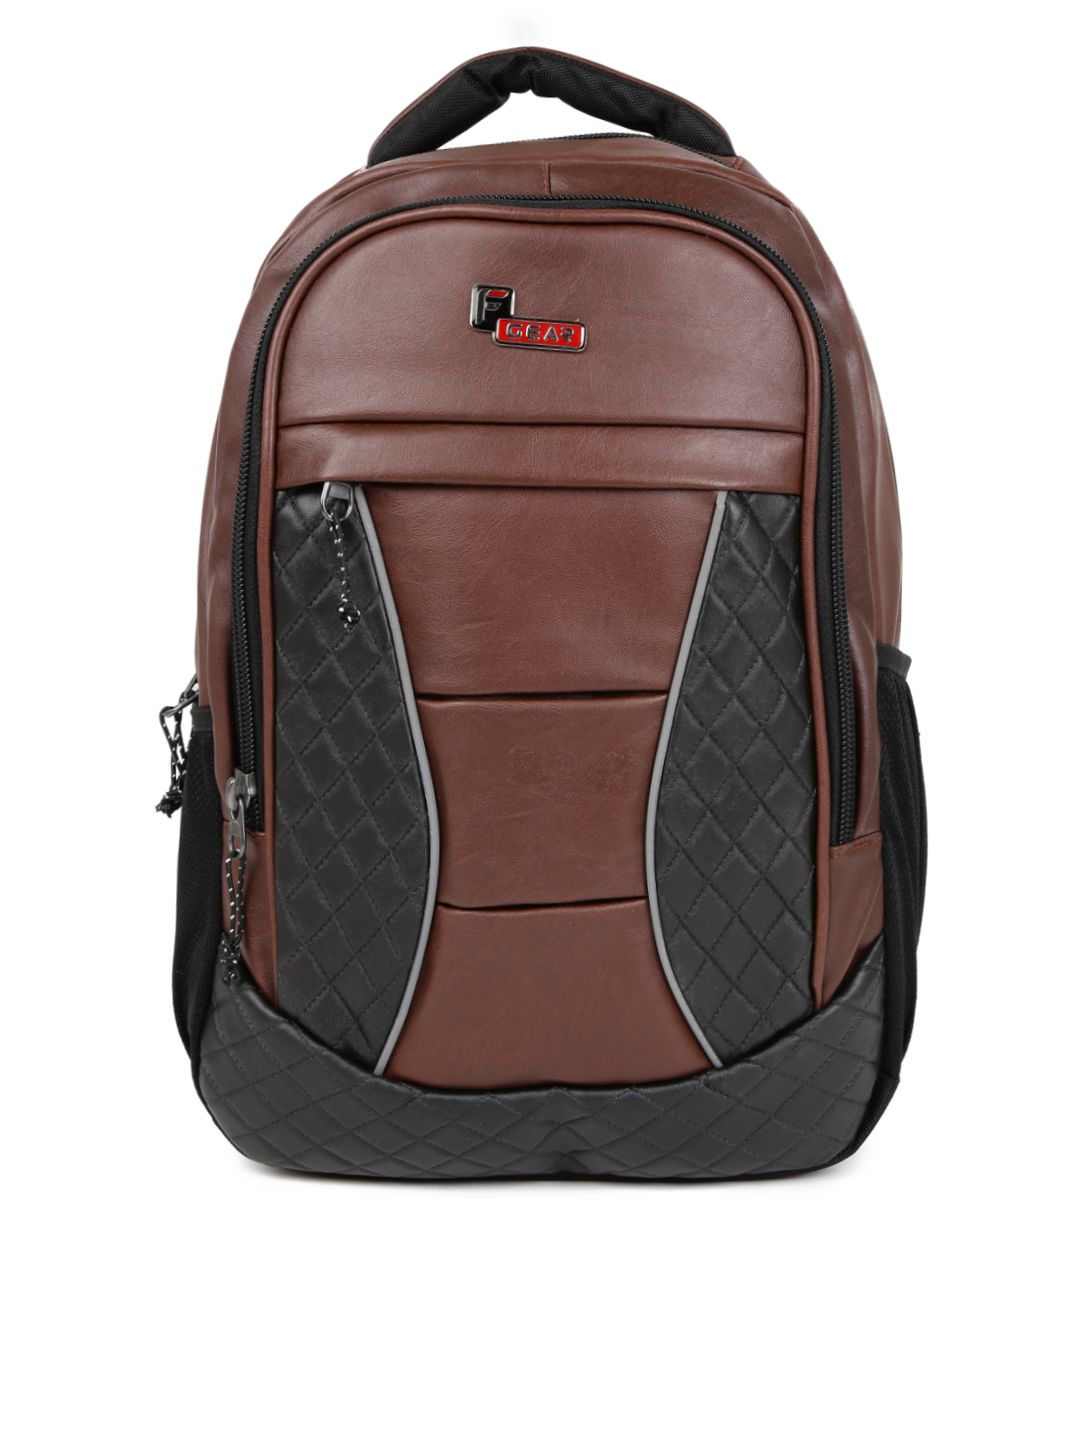 F Gear Unisex Brown & Black Colourblocked Backpack Price in India